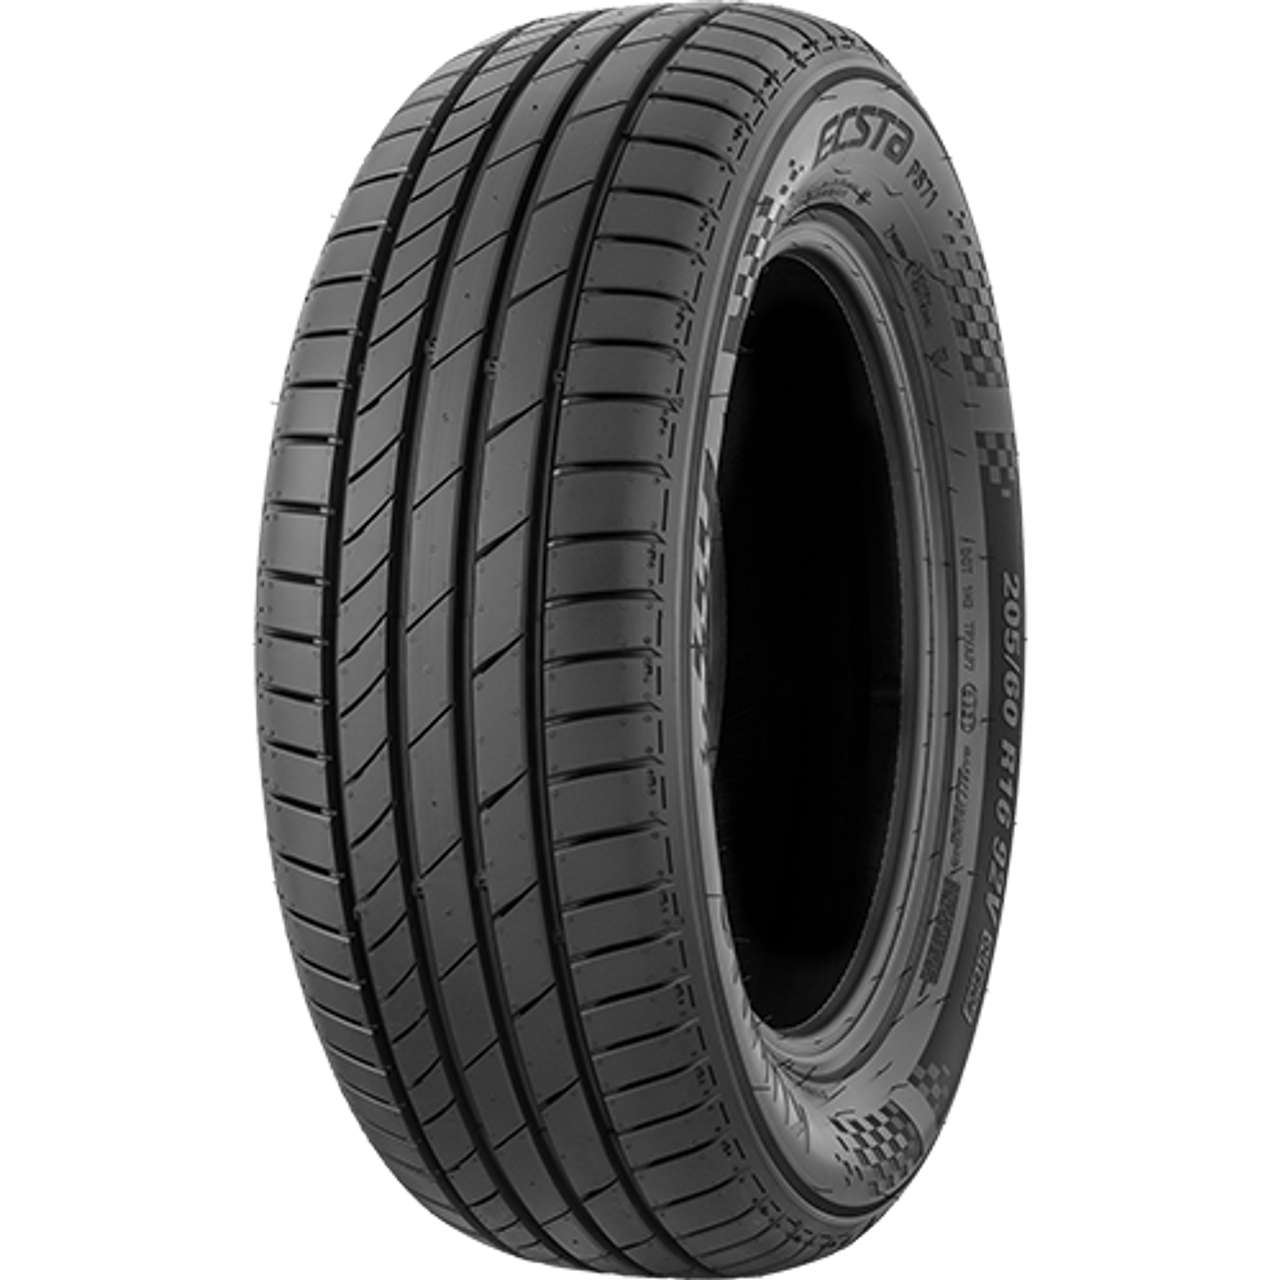 KUMHO ECSTA PS71 255/35ZR21 98Y BSW